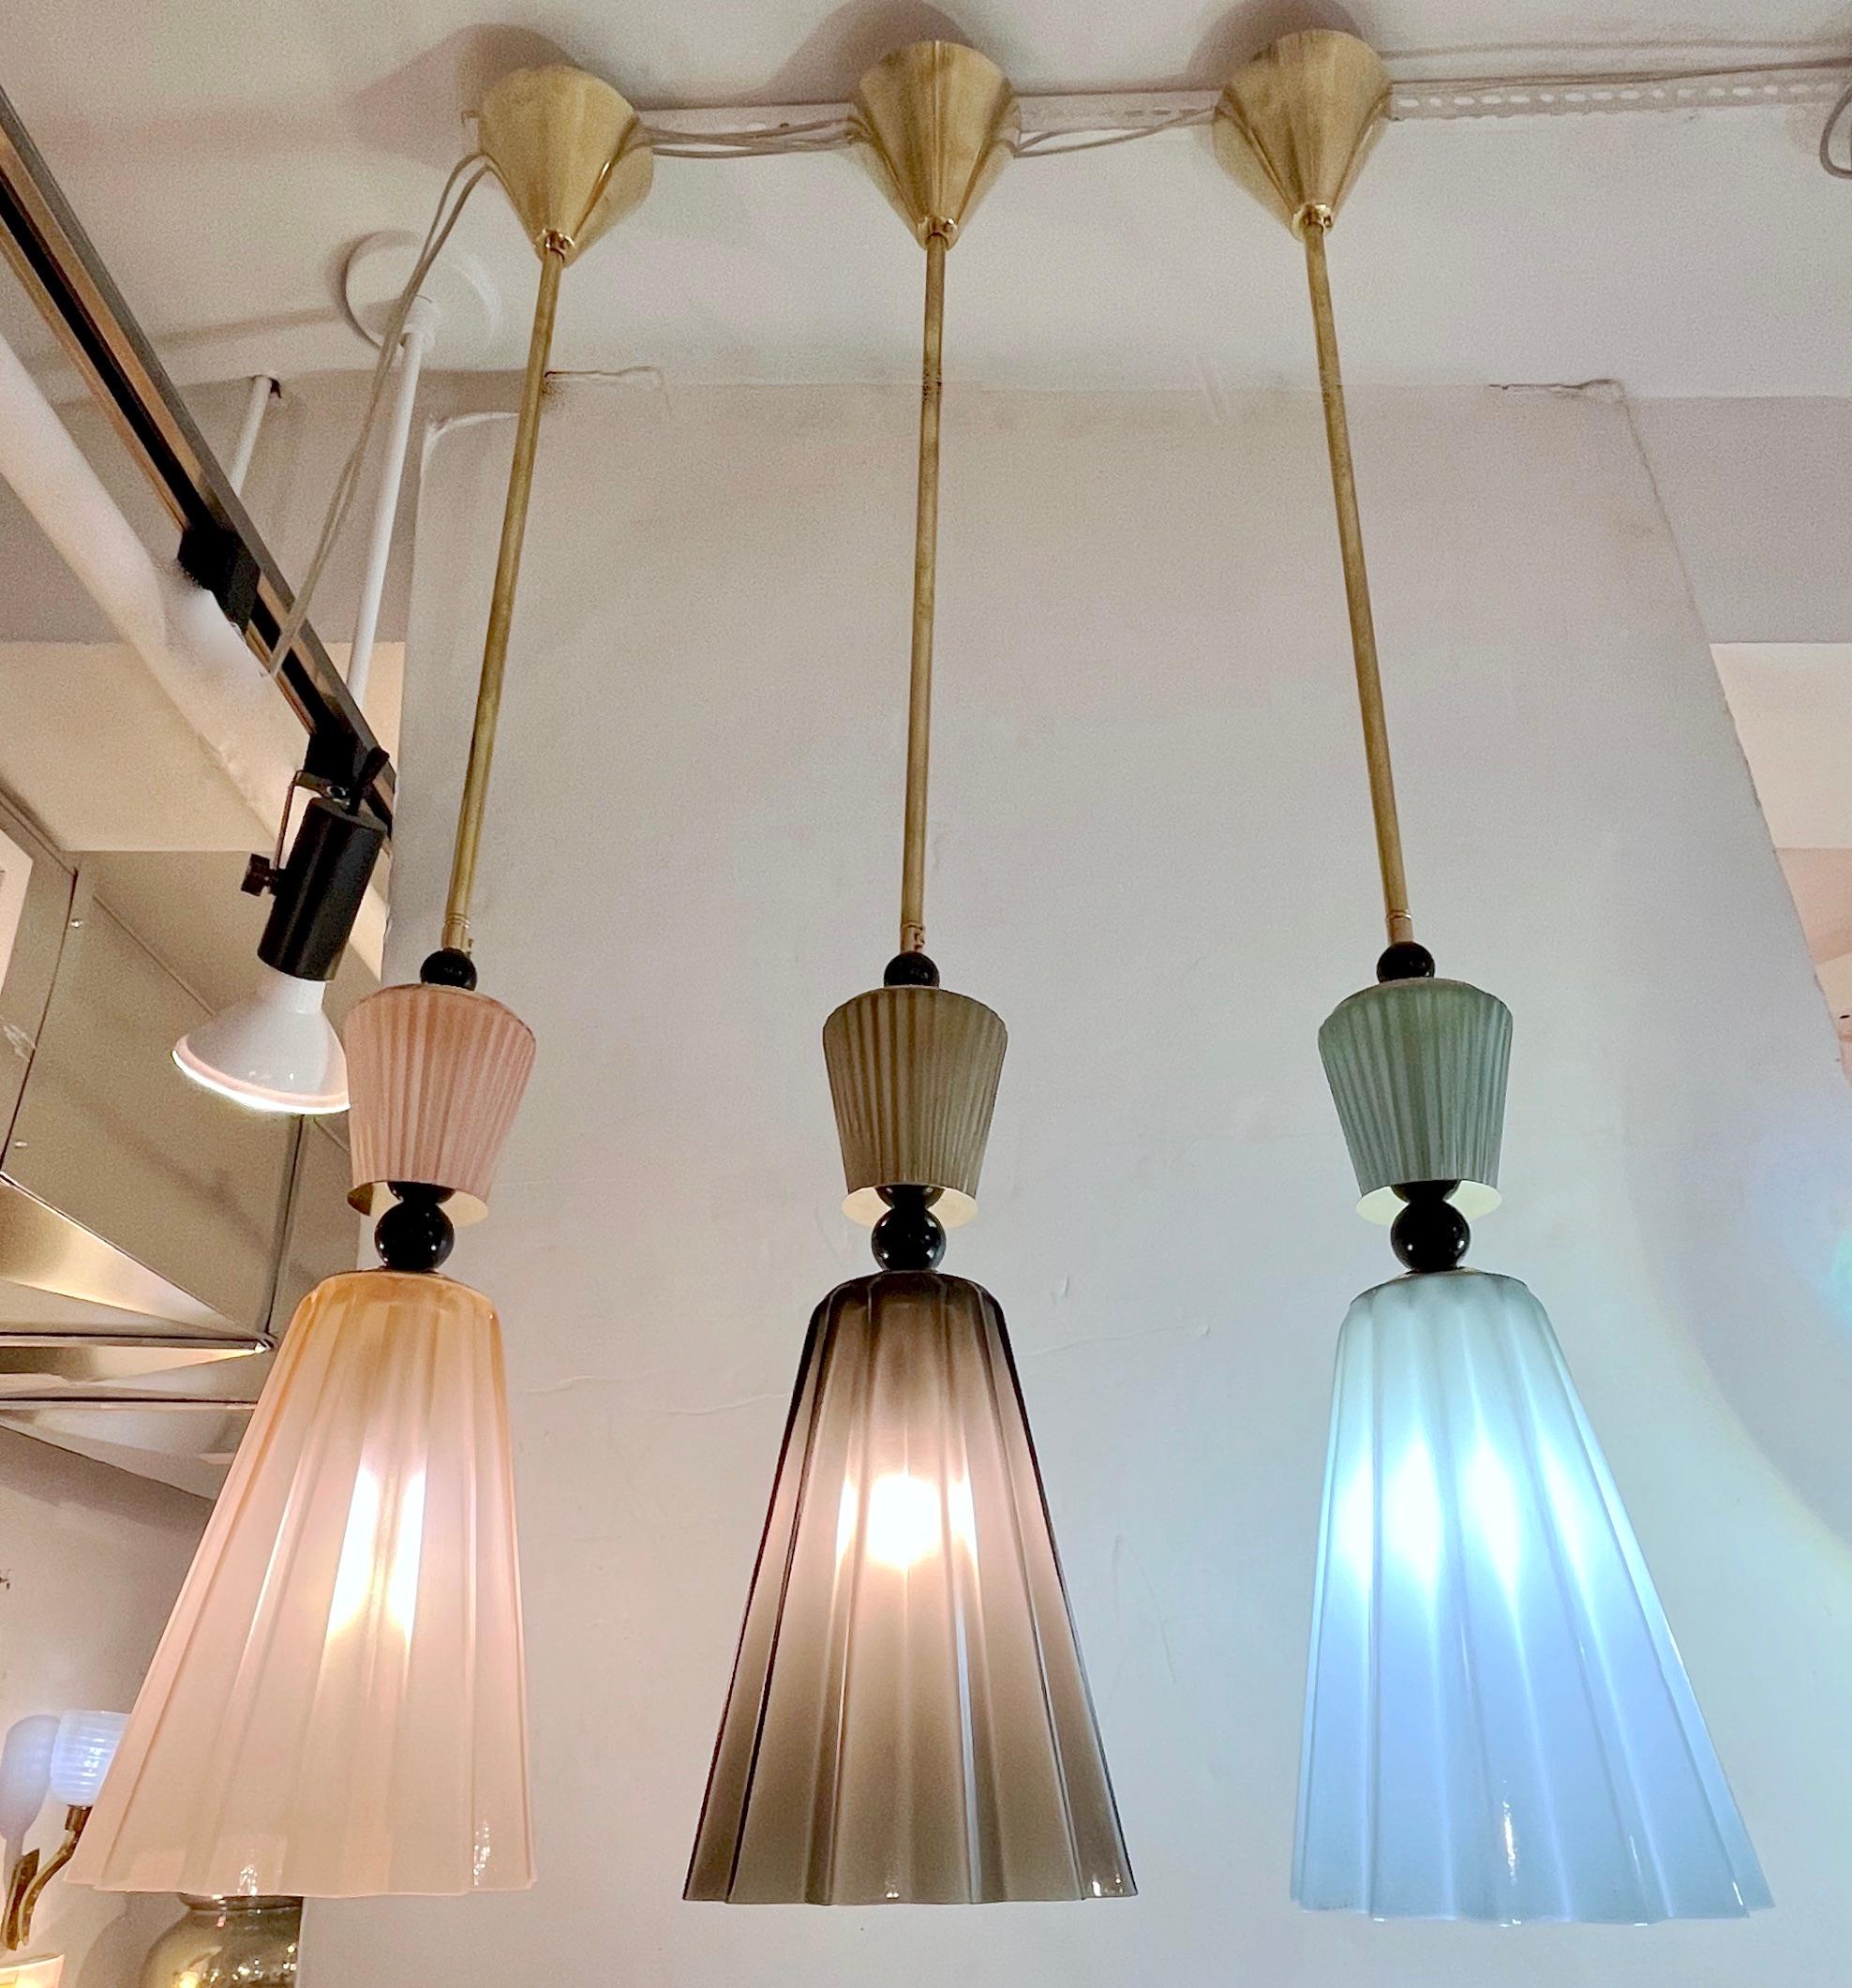 3 Pendants in opaline blown Murano glass of star shape, each a different color in smoked gray, light pink, aqua-blue, decorated with a reeded glass cap accompanied with black glass spheres, fitted with a handmade triangular canopy. High quality of